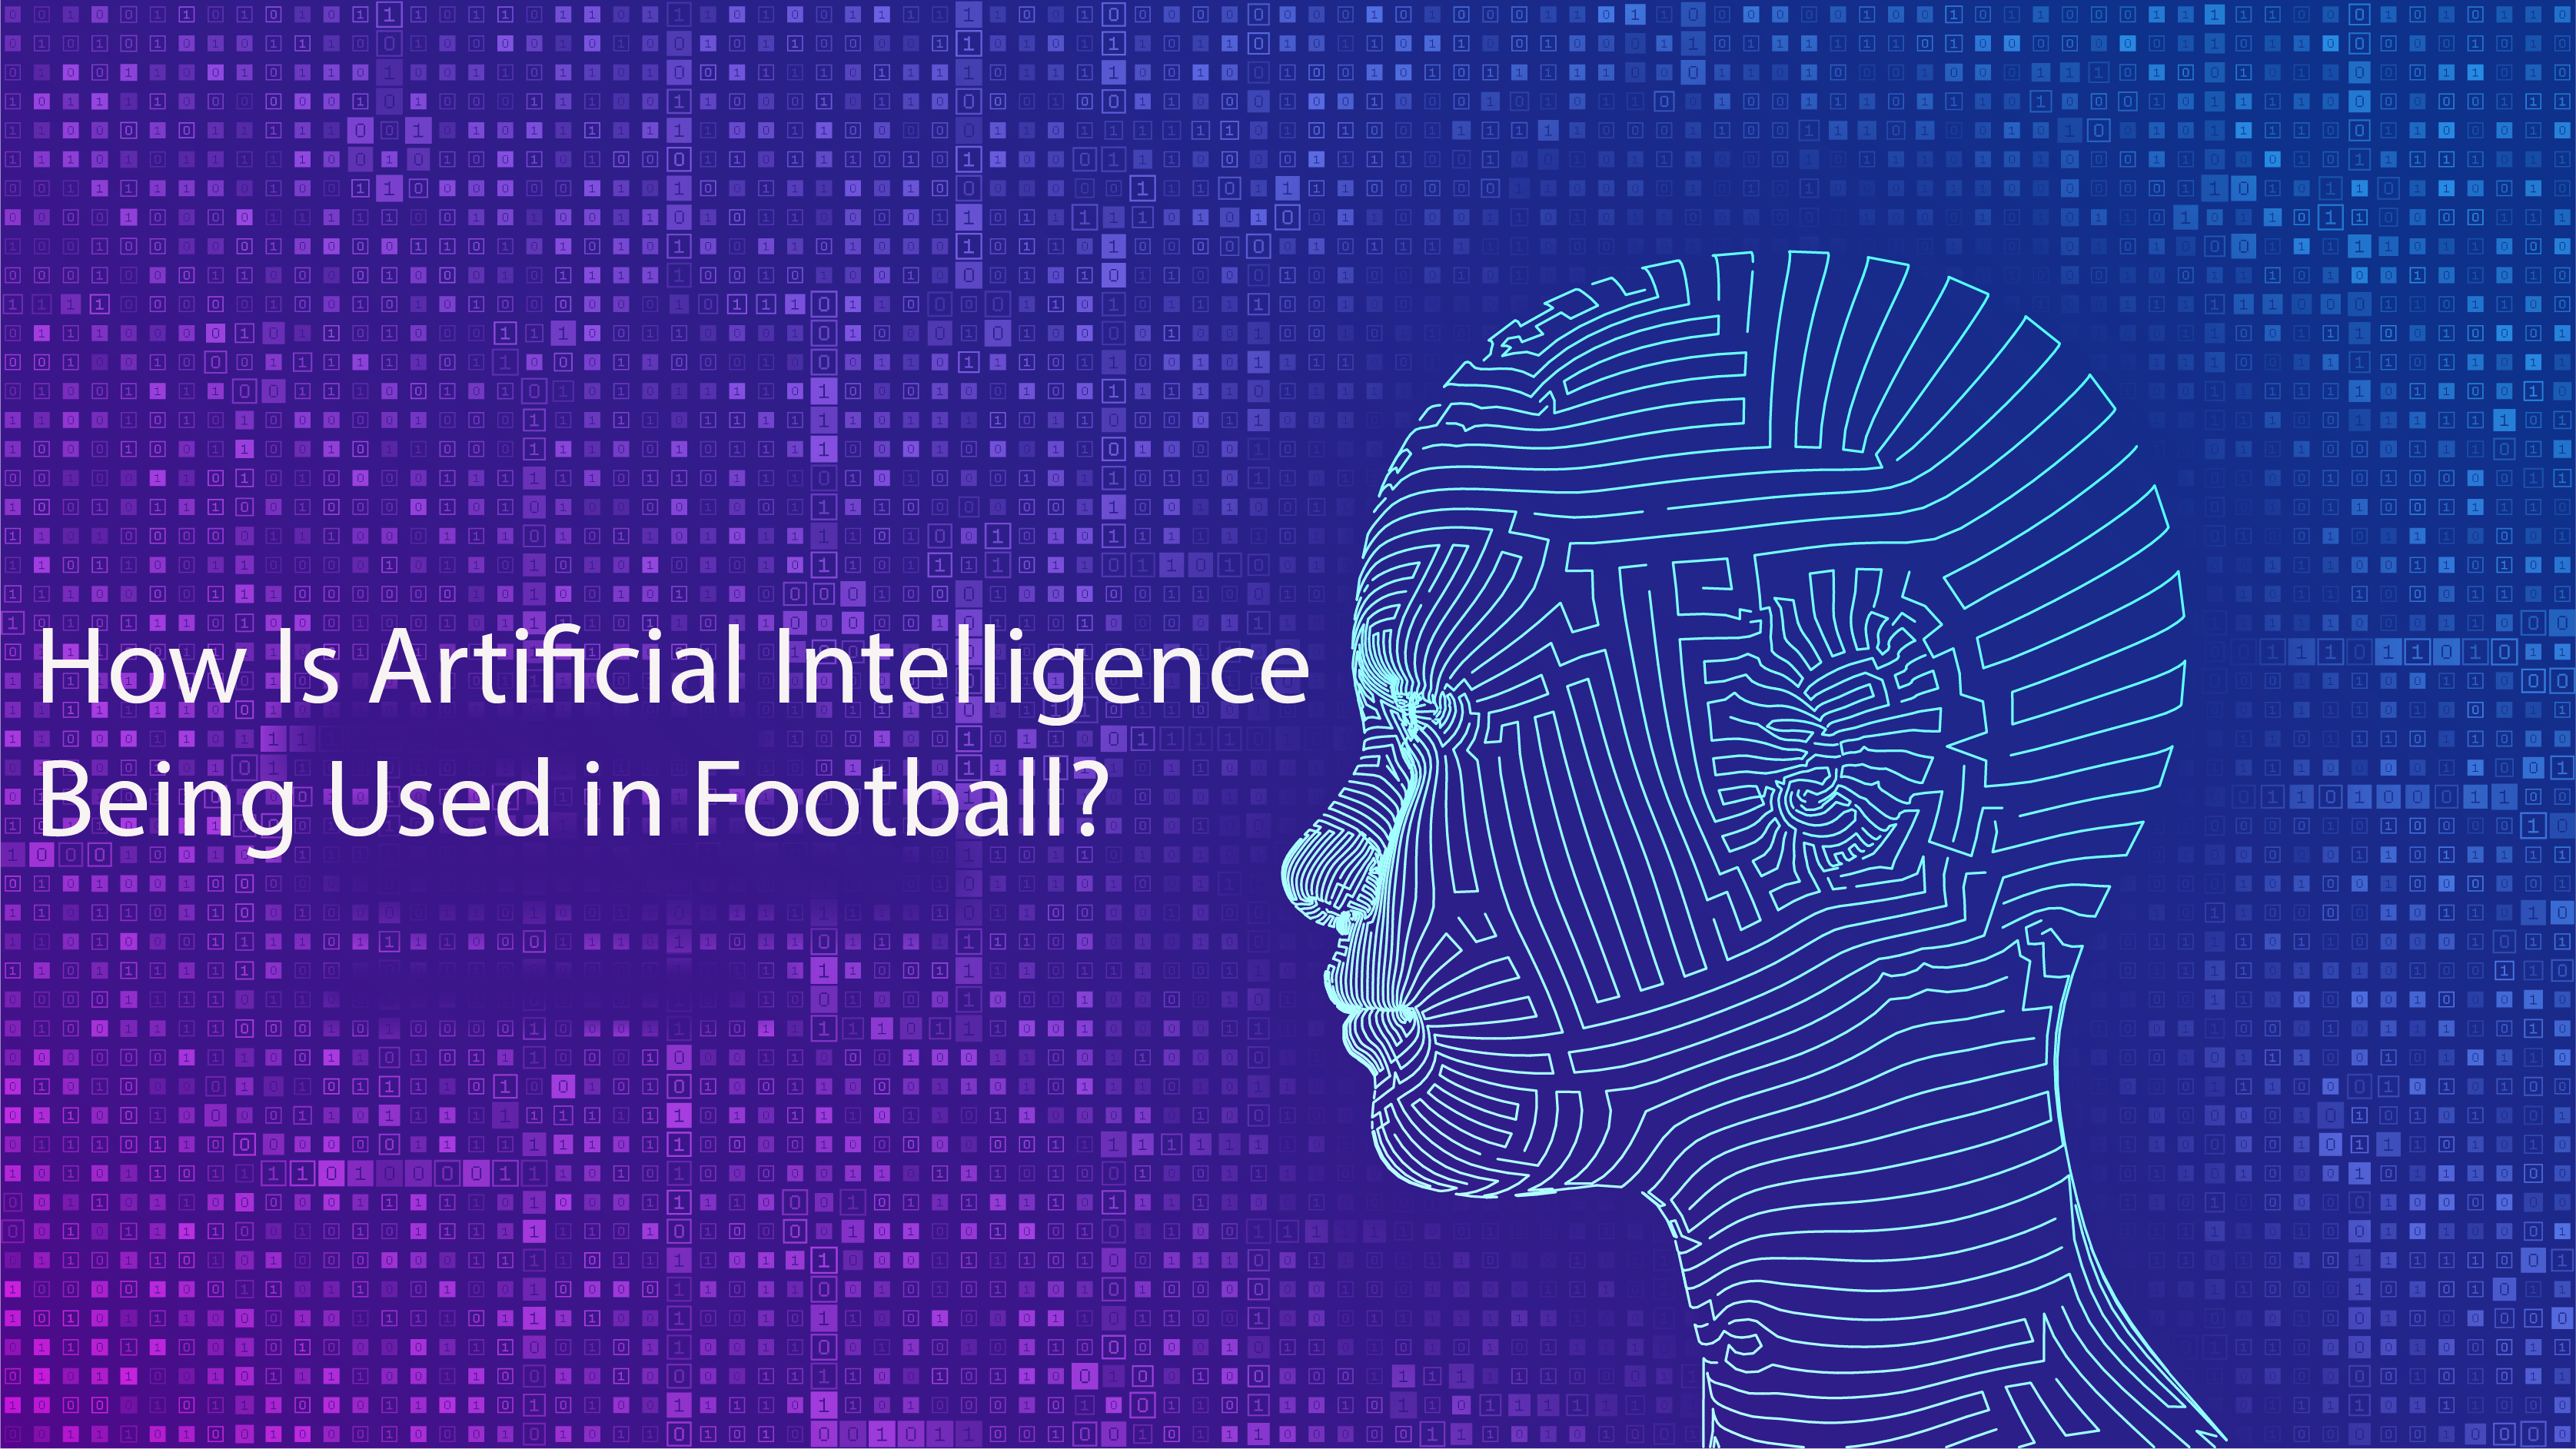 How Is Artificial Intelligence Being Used in Football?